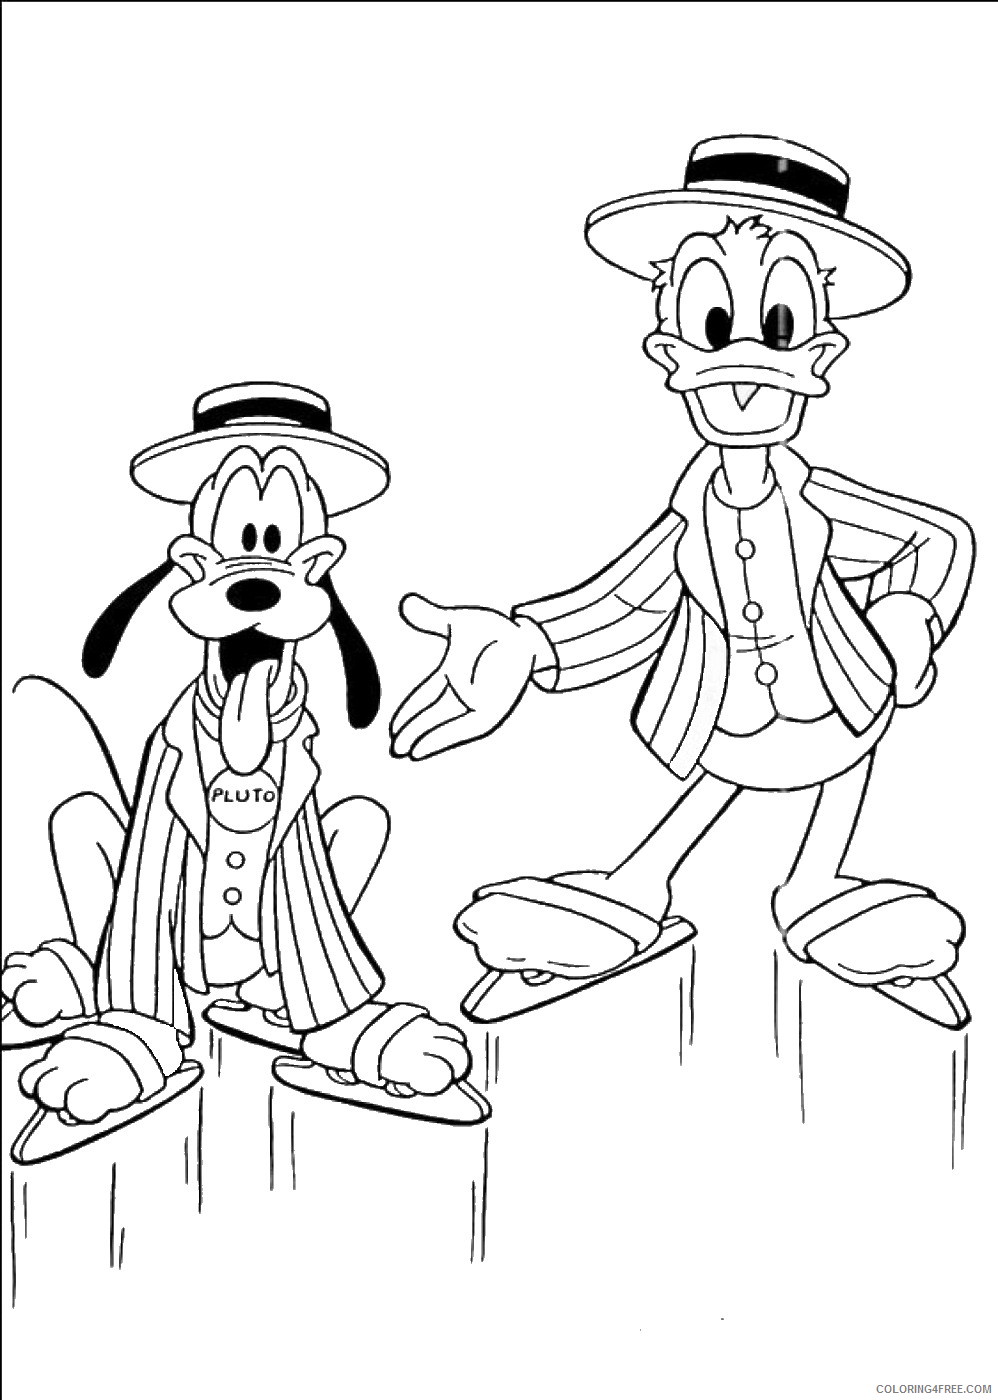 Pluto Coloring Pages Cartoons pluto_cl_01 Printable 2020 4923 Coloring4free